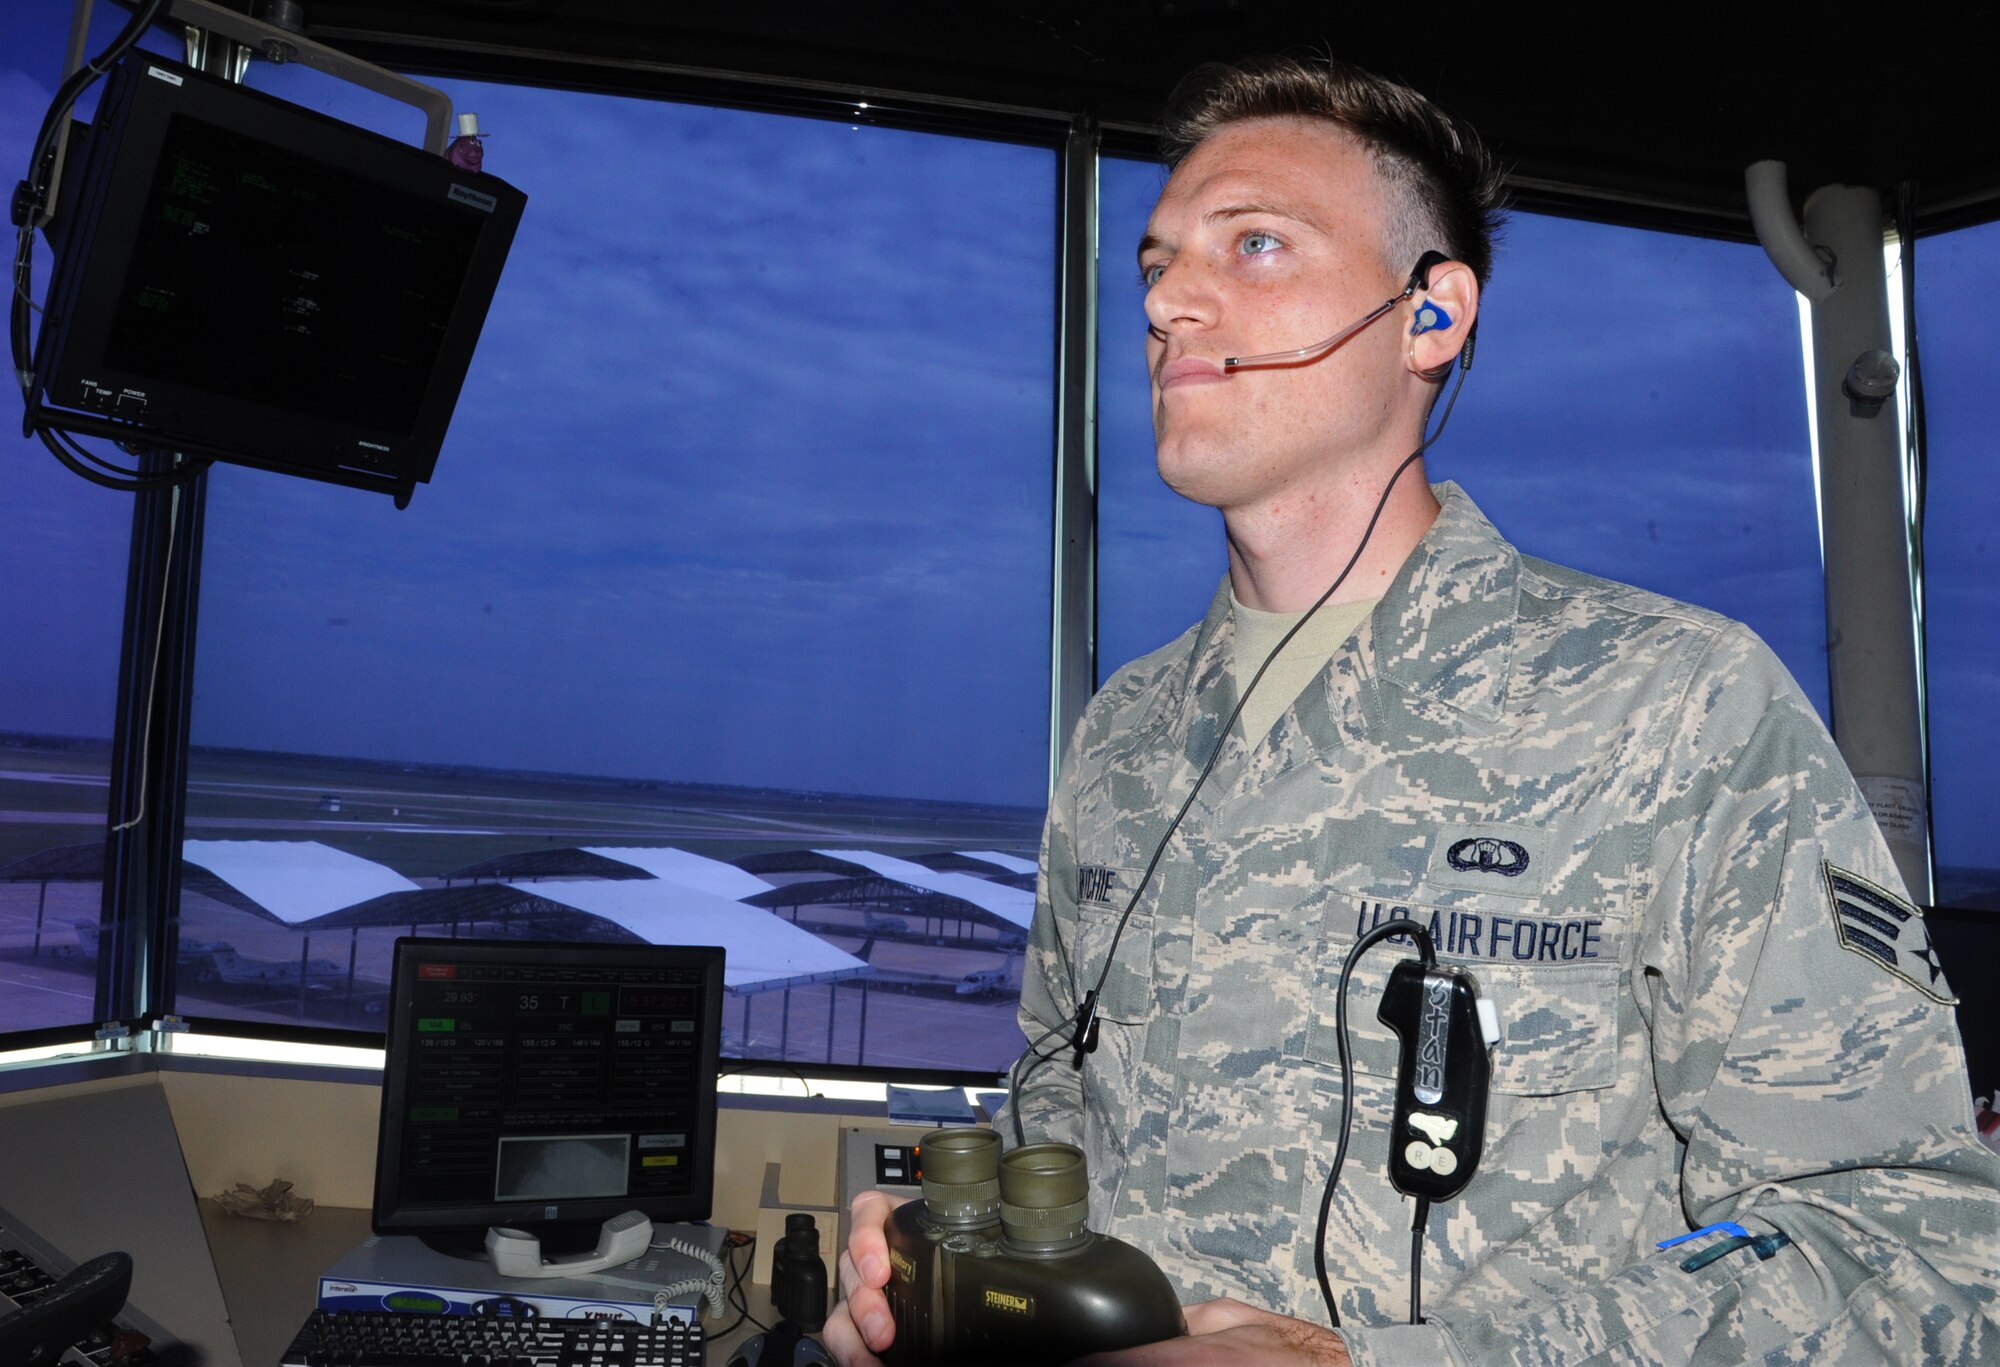 Senior Airman Wesley Ritchie, a 71st Operations Support Squadron air traffic controller, watches for aircraft in the air traffic control tower. Richie is the 71st Flying Training Wing Airman of the Month for July. (U.S. Air Force photo/Senior Airman Frank Casciotta)